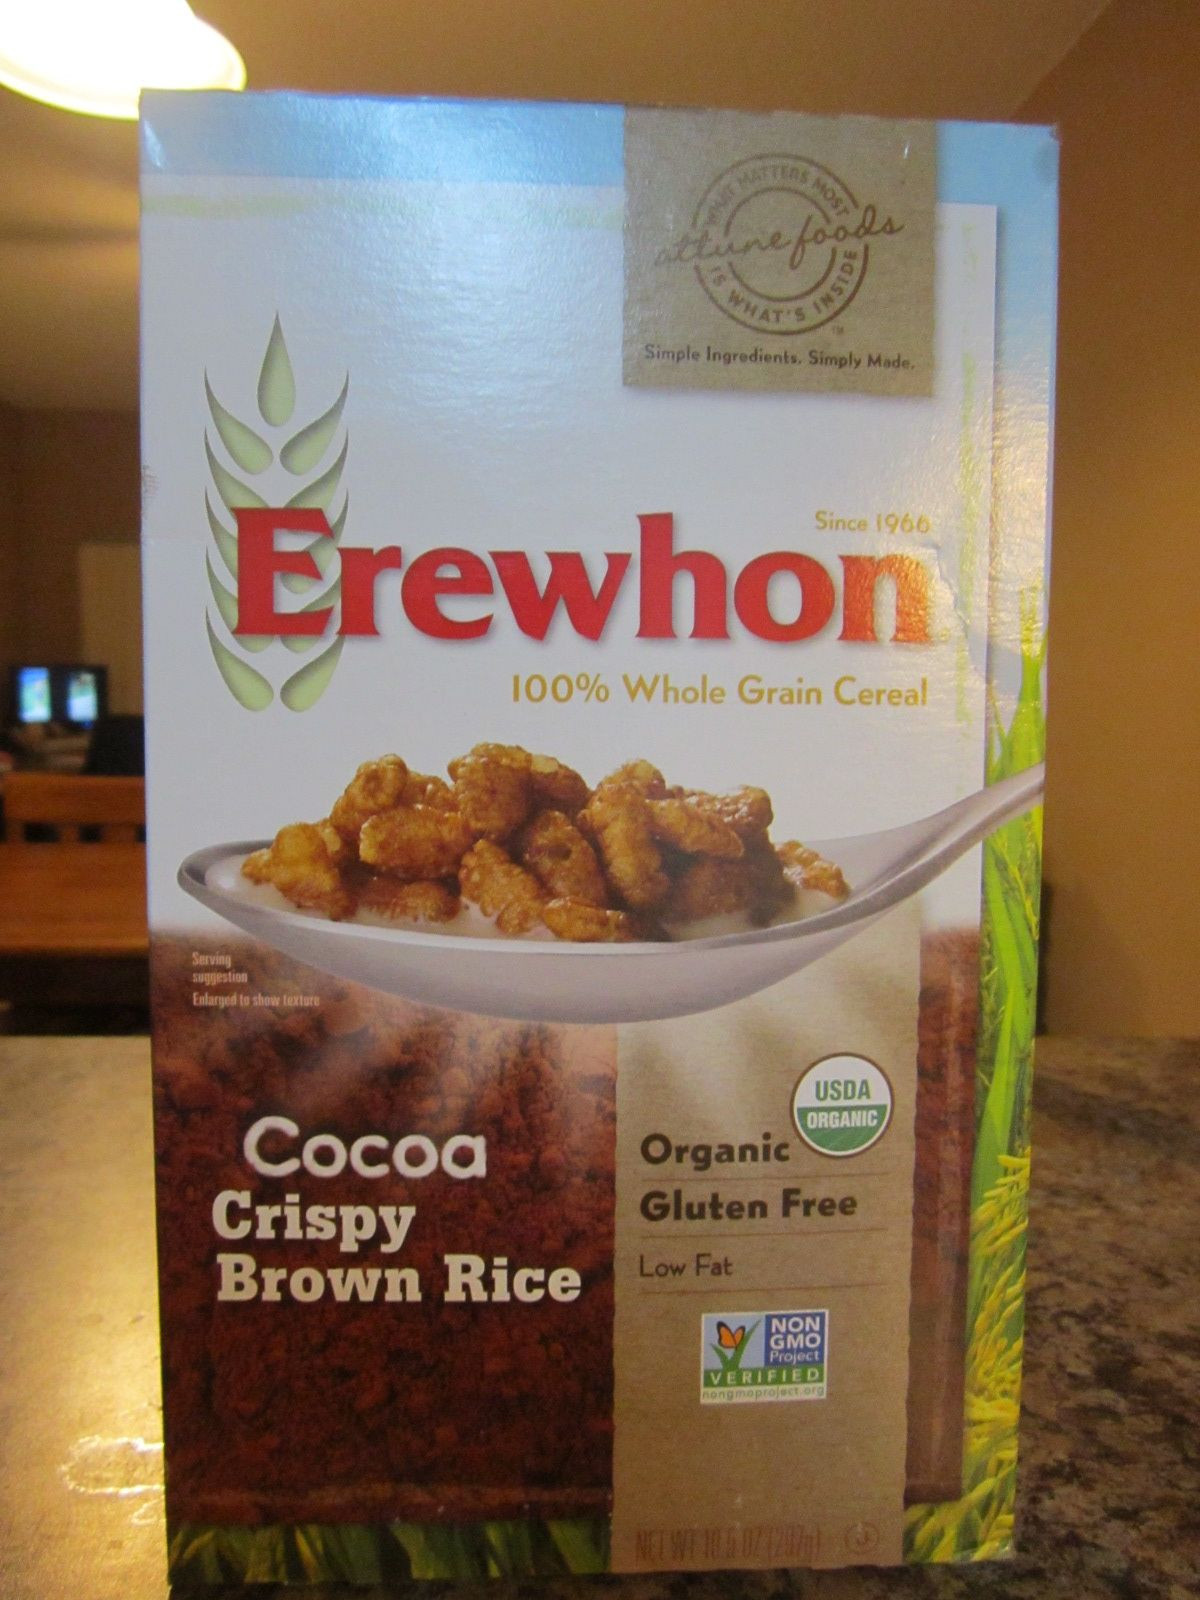 Crispy Brown Rice Cereal
 Our Hope Is In The Lord Erewhon Cocoa Crispy Brown Rice